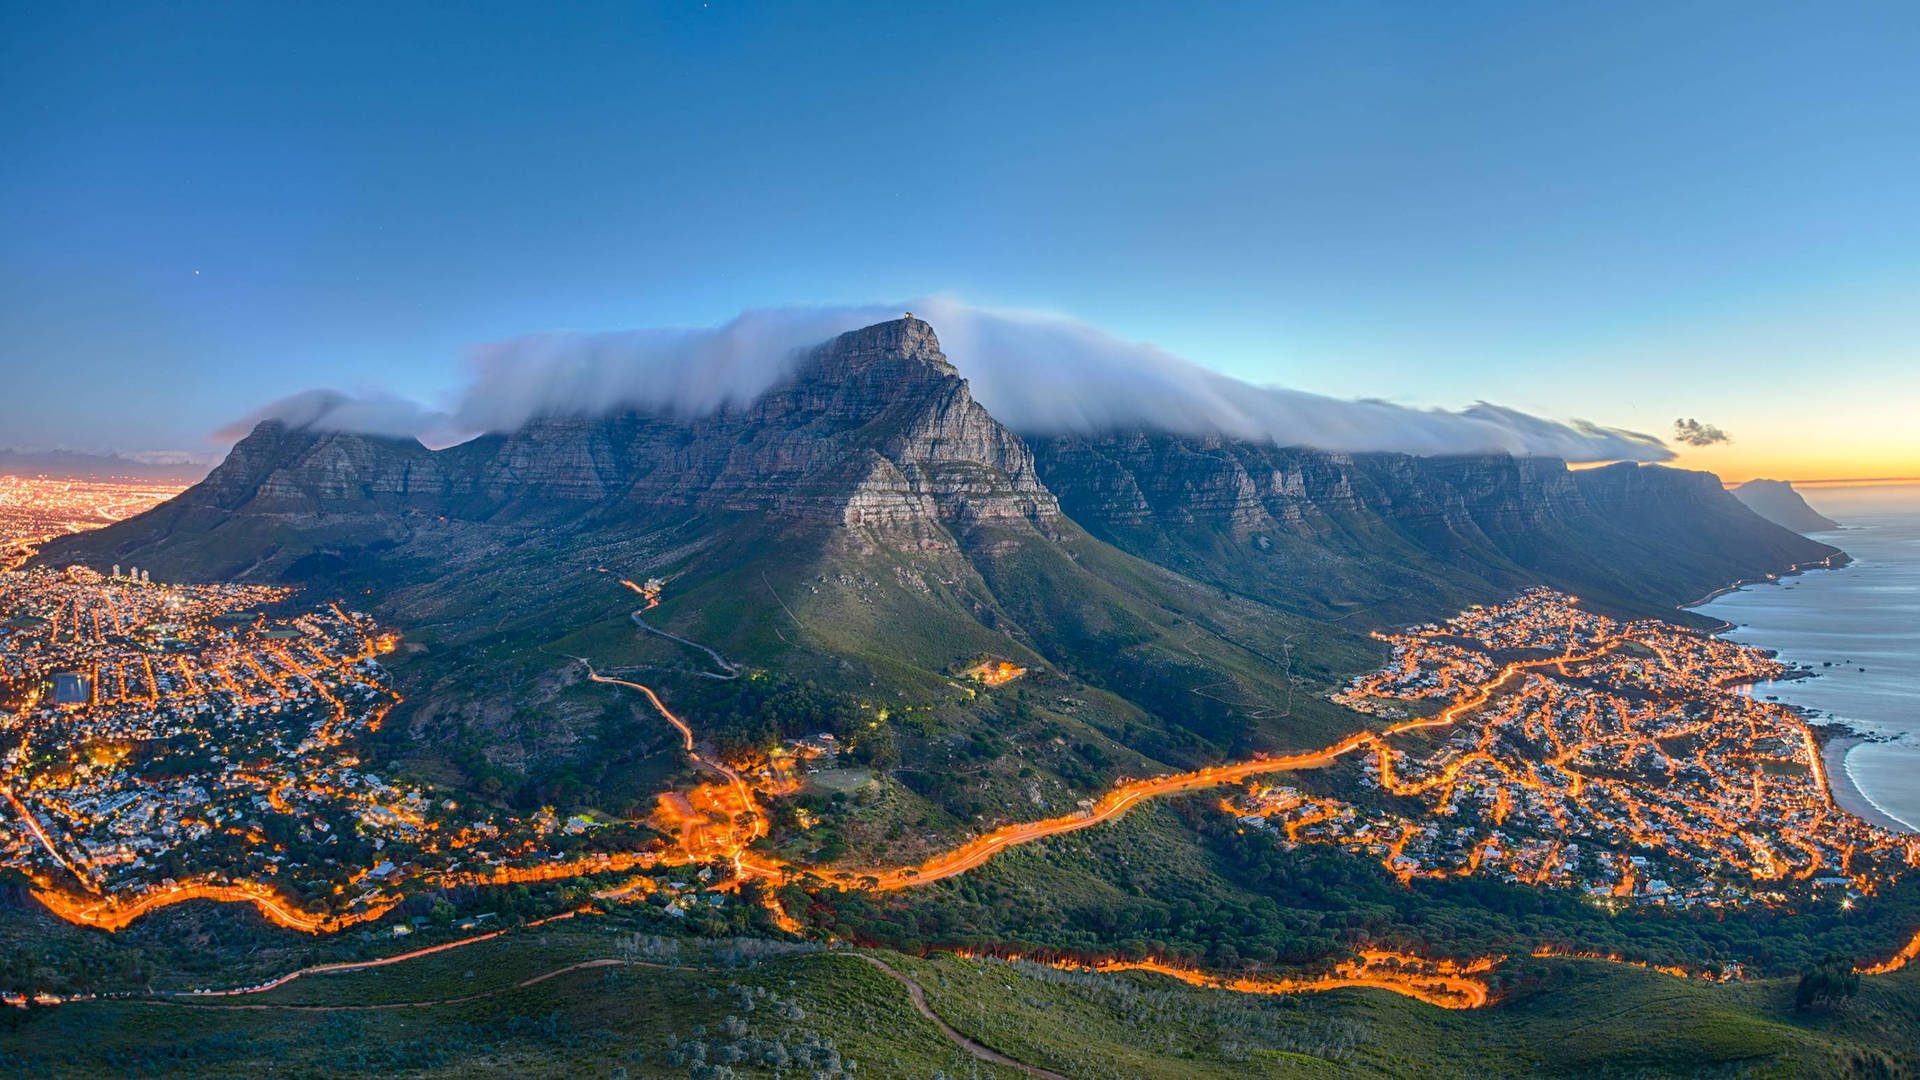 Mountain Peak In South Africa